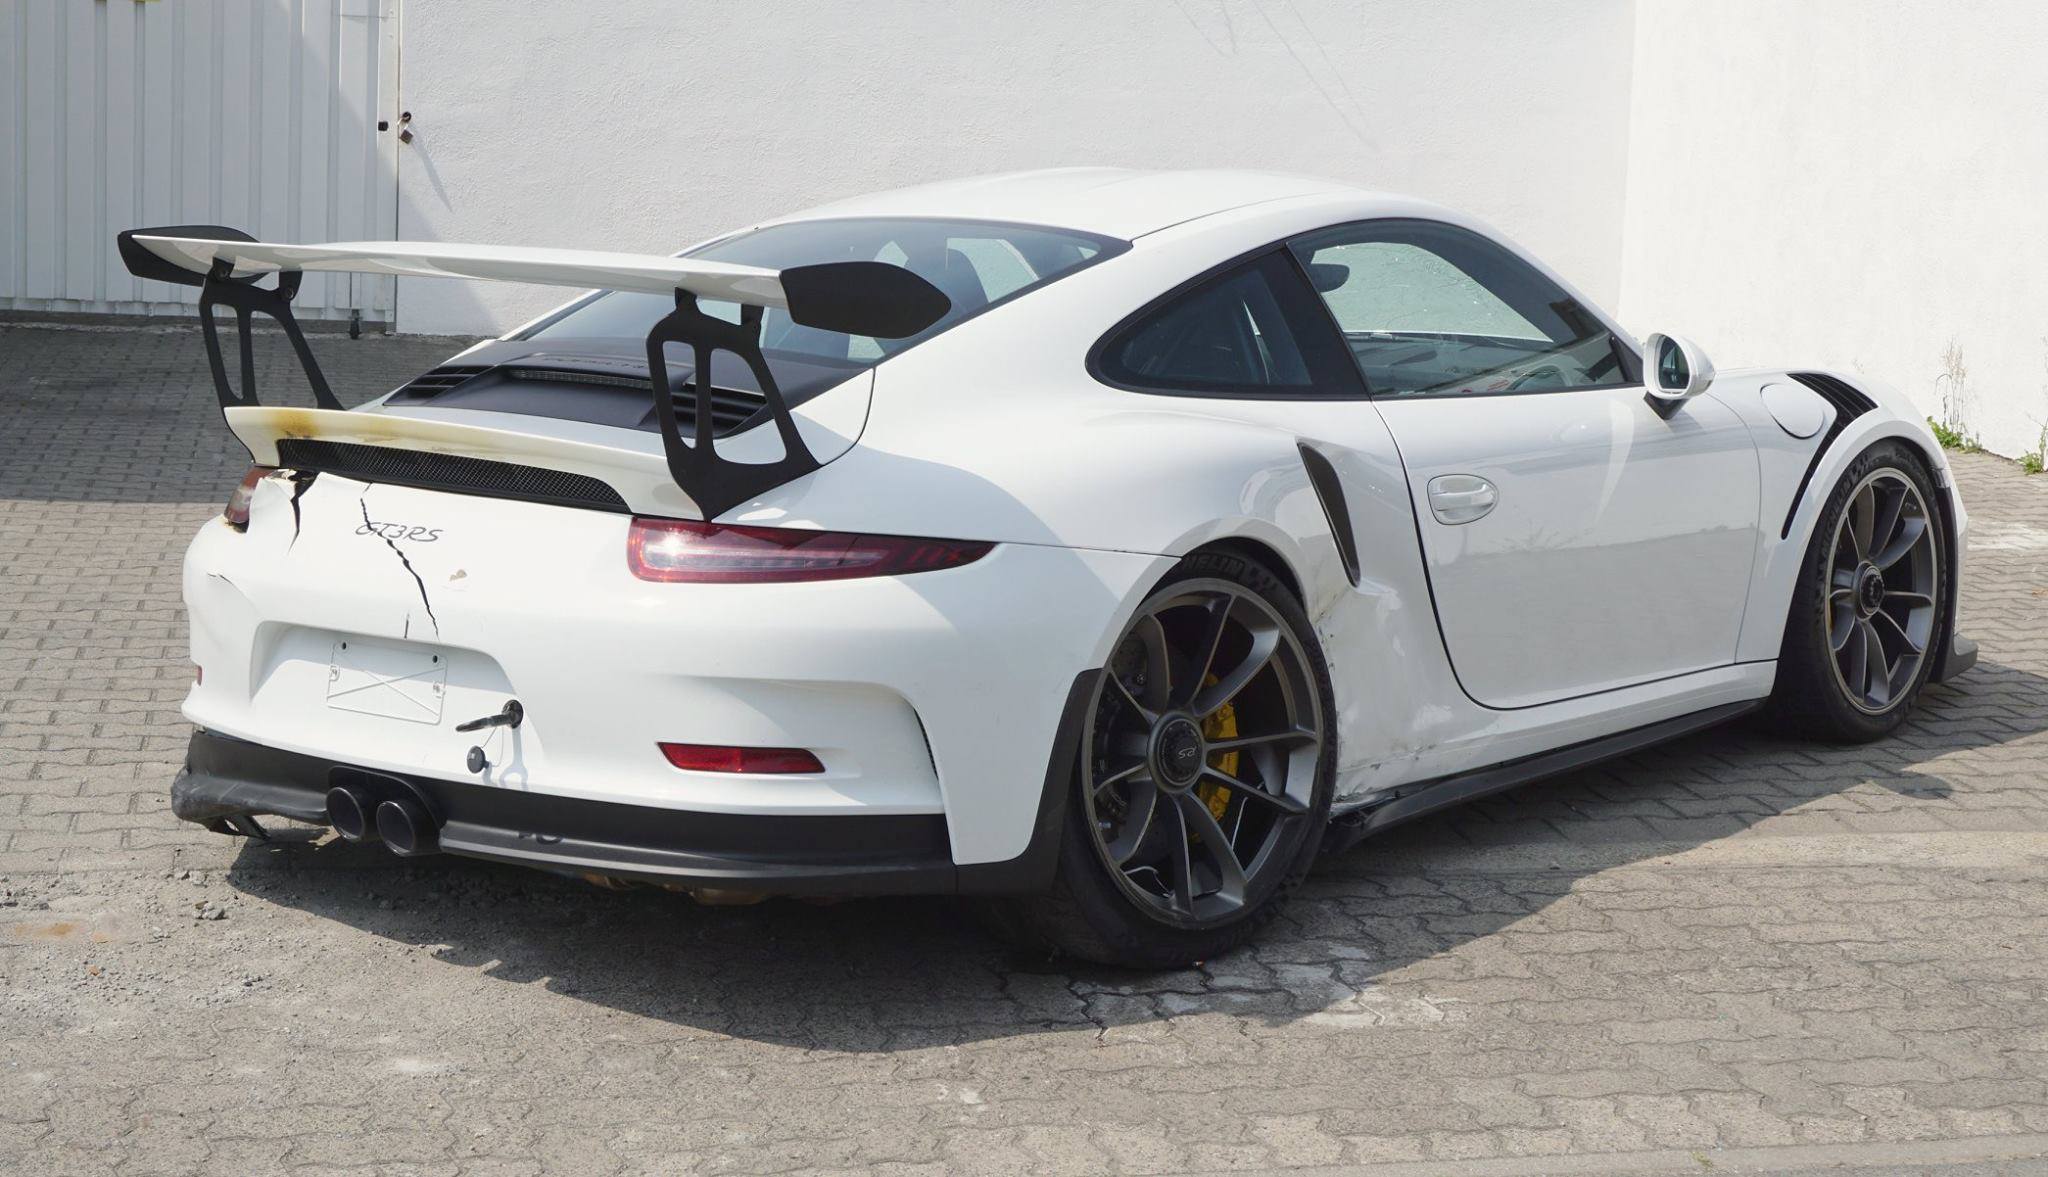 gt3 porsche 911 rs 991 crash brand crashed fire signs shows accident damage damaged autoevolution wrecked rear hp hurts engine